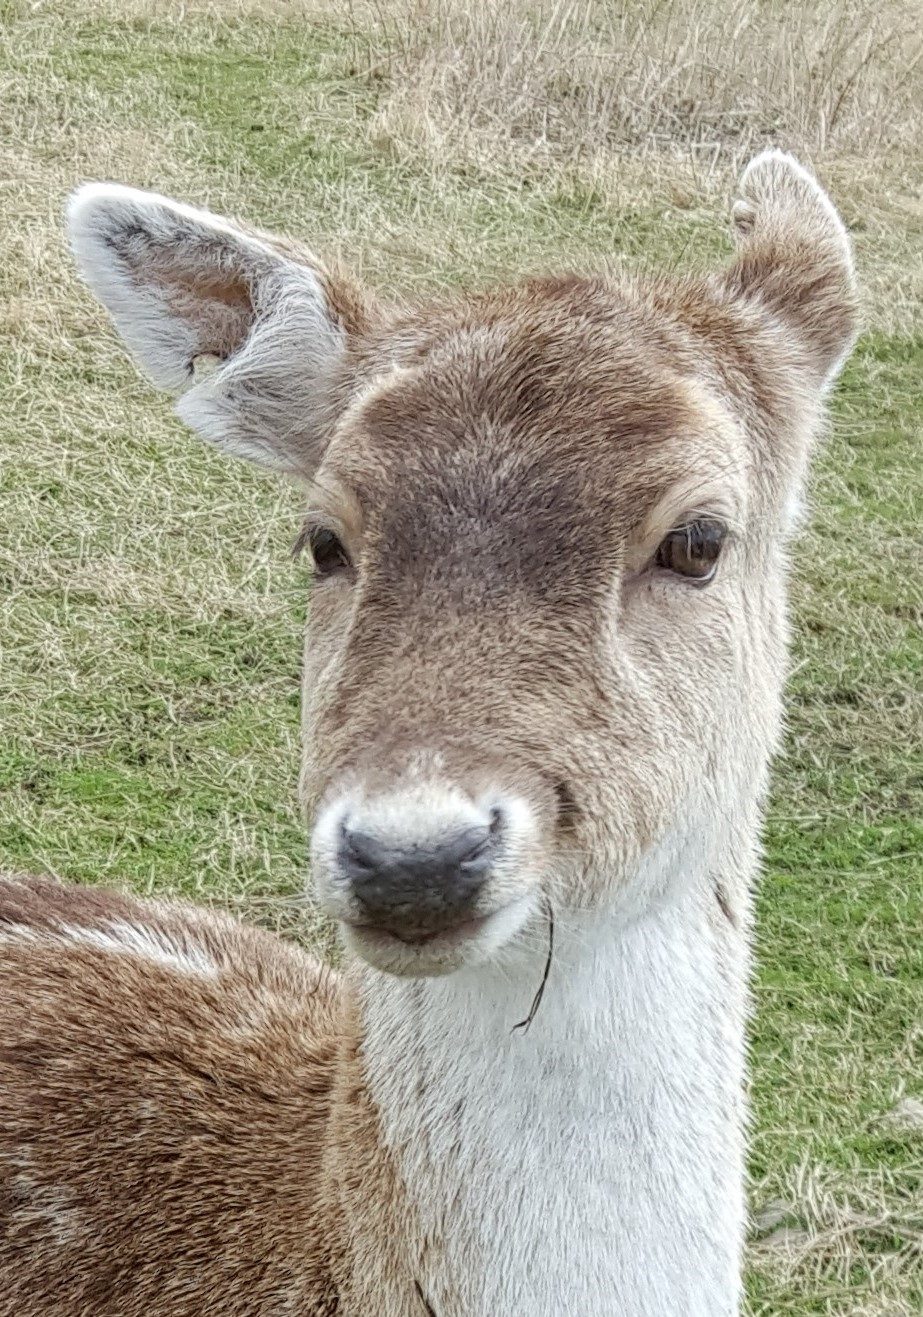 REVIEWING A MEMORABLE AND CAPTIVATING DAY AT THE SCOTTISH DEER CENTRE IN FIFE